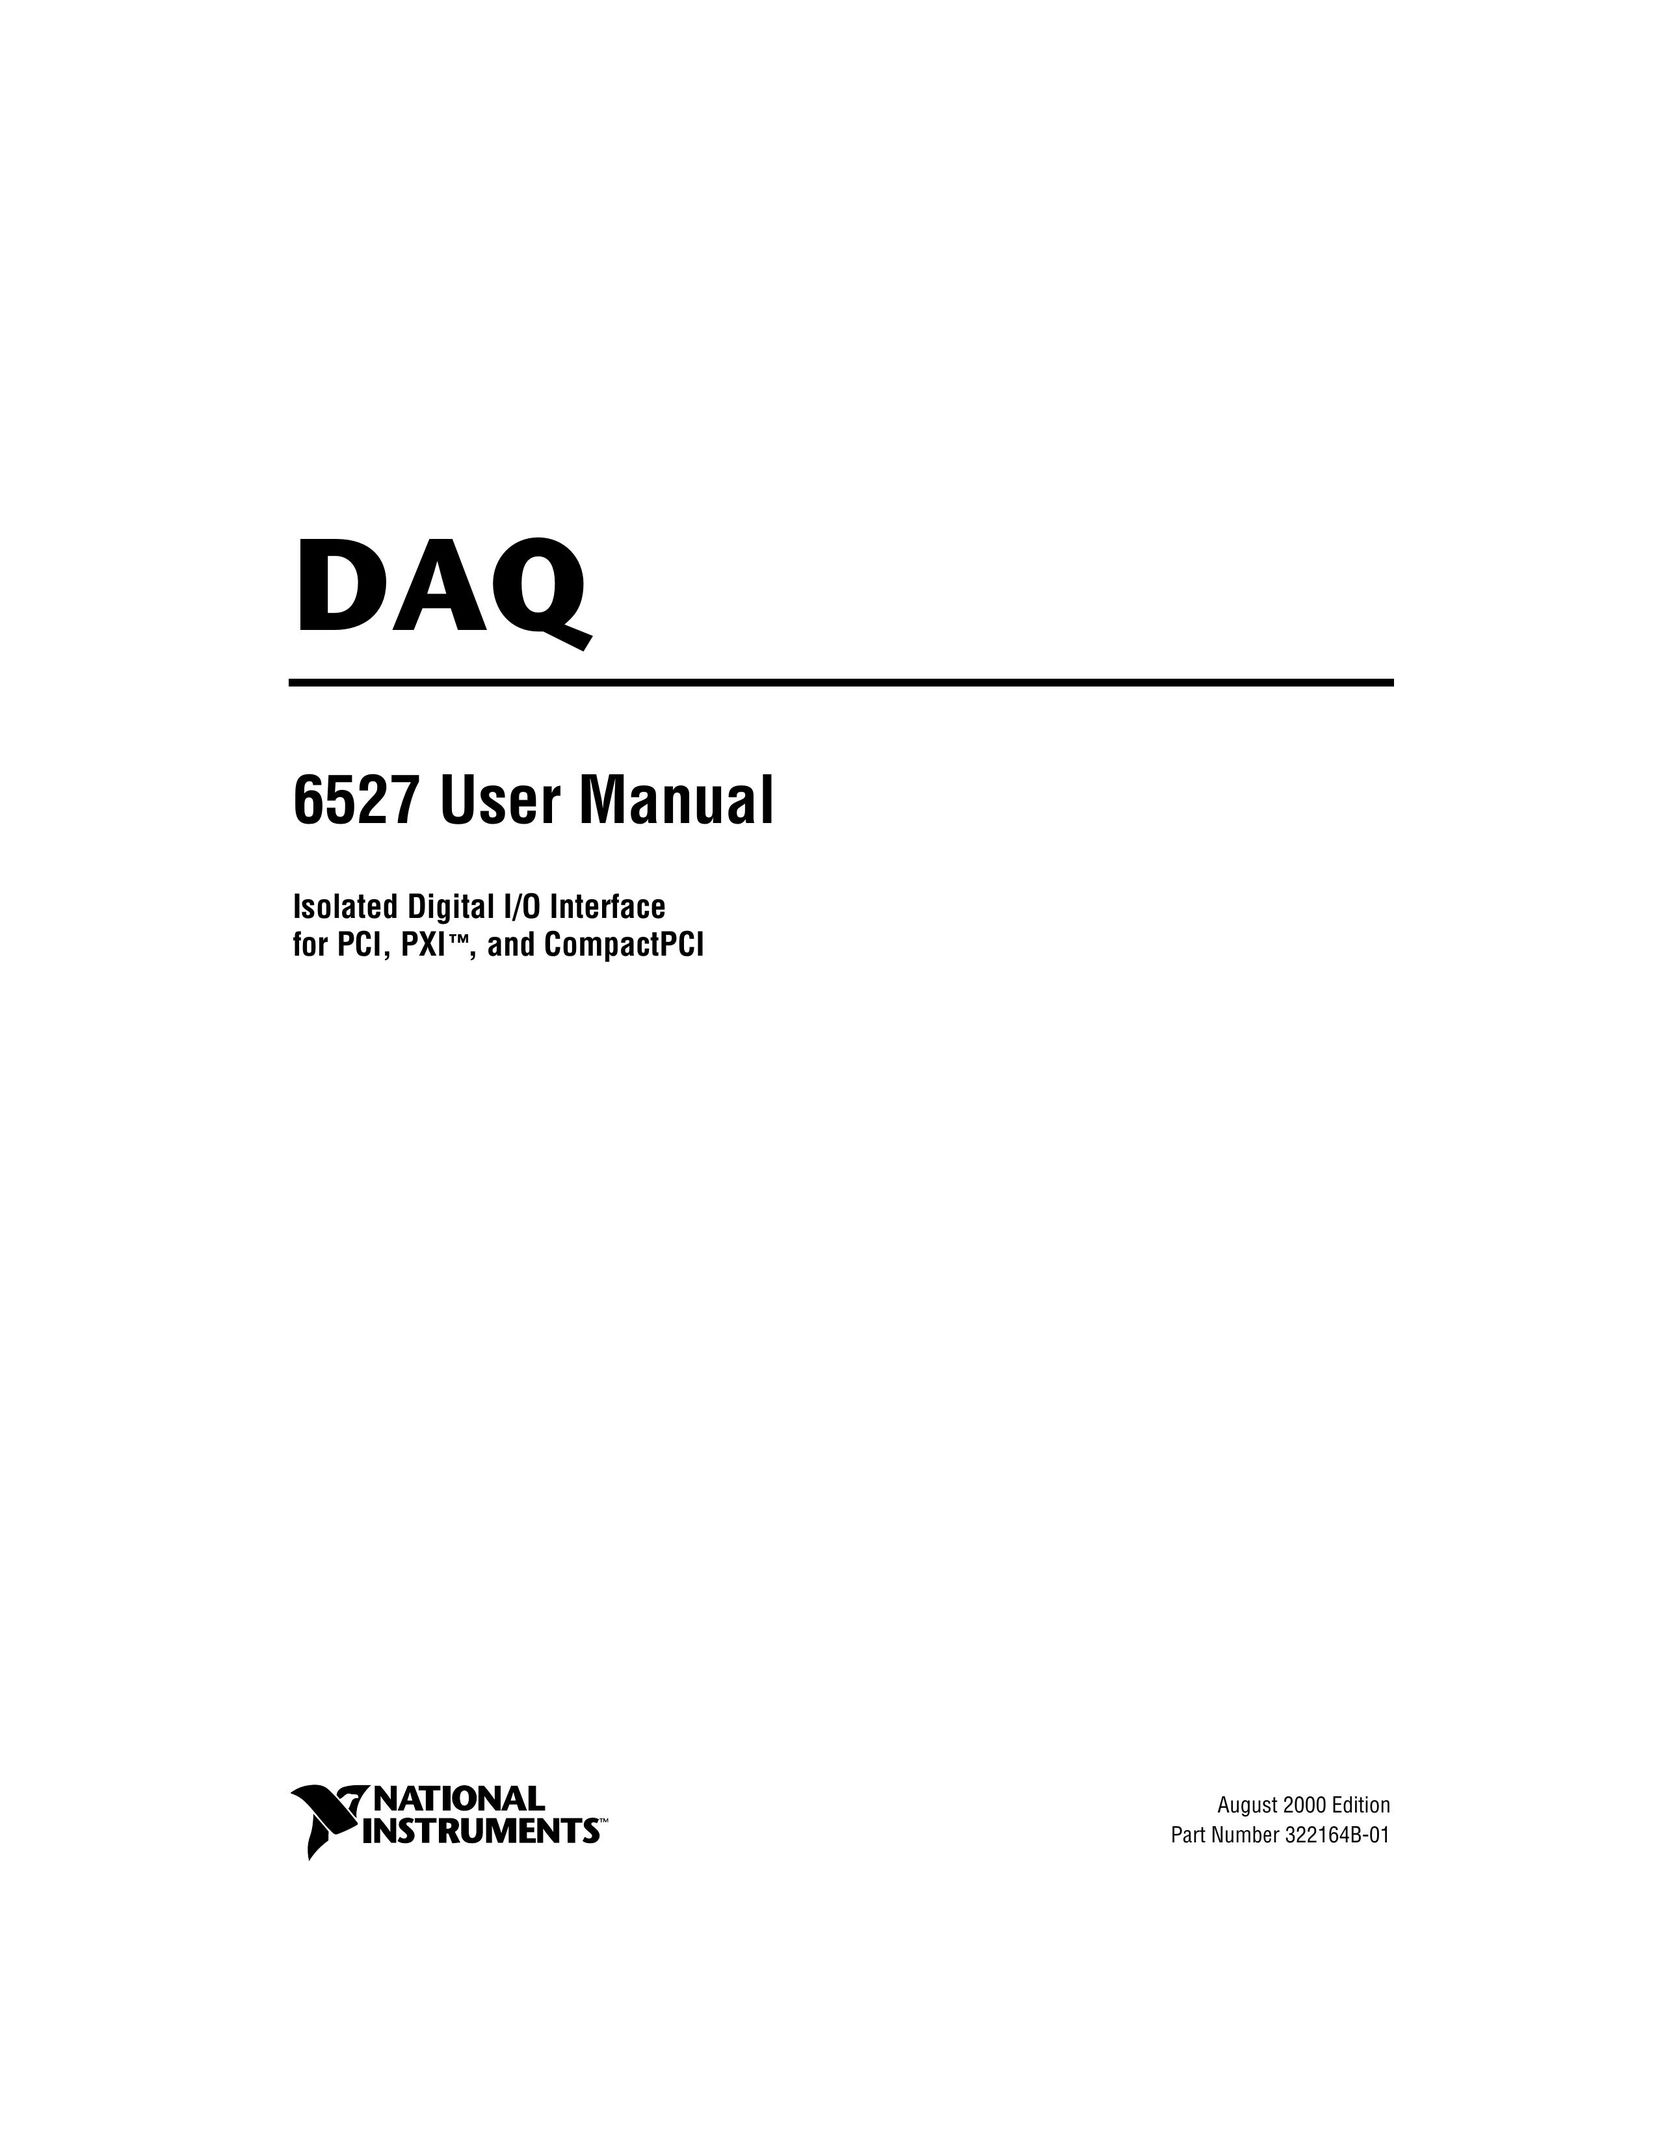 National Instruments 6527 Switch User Manual